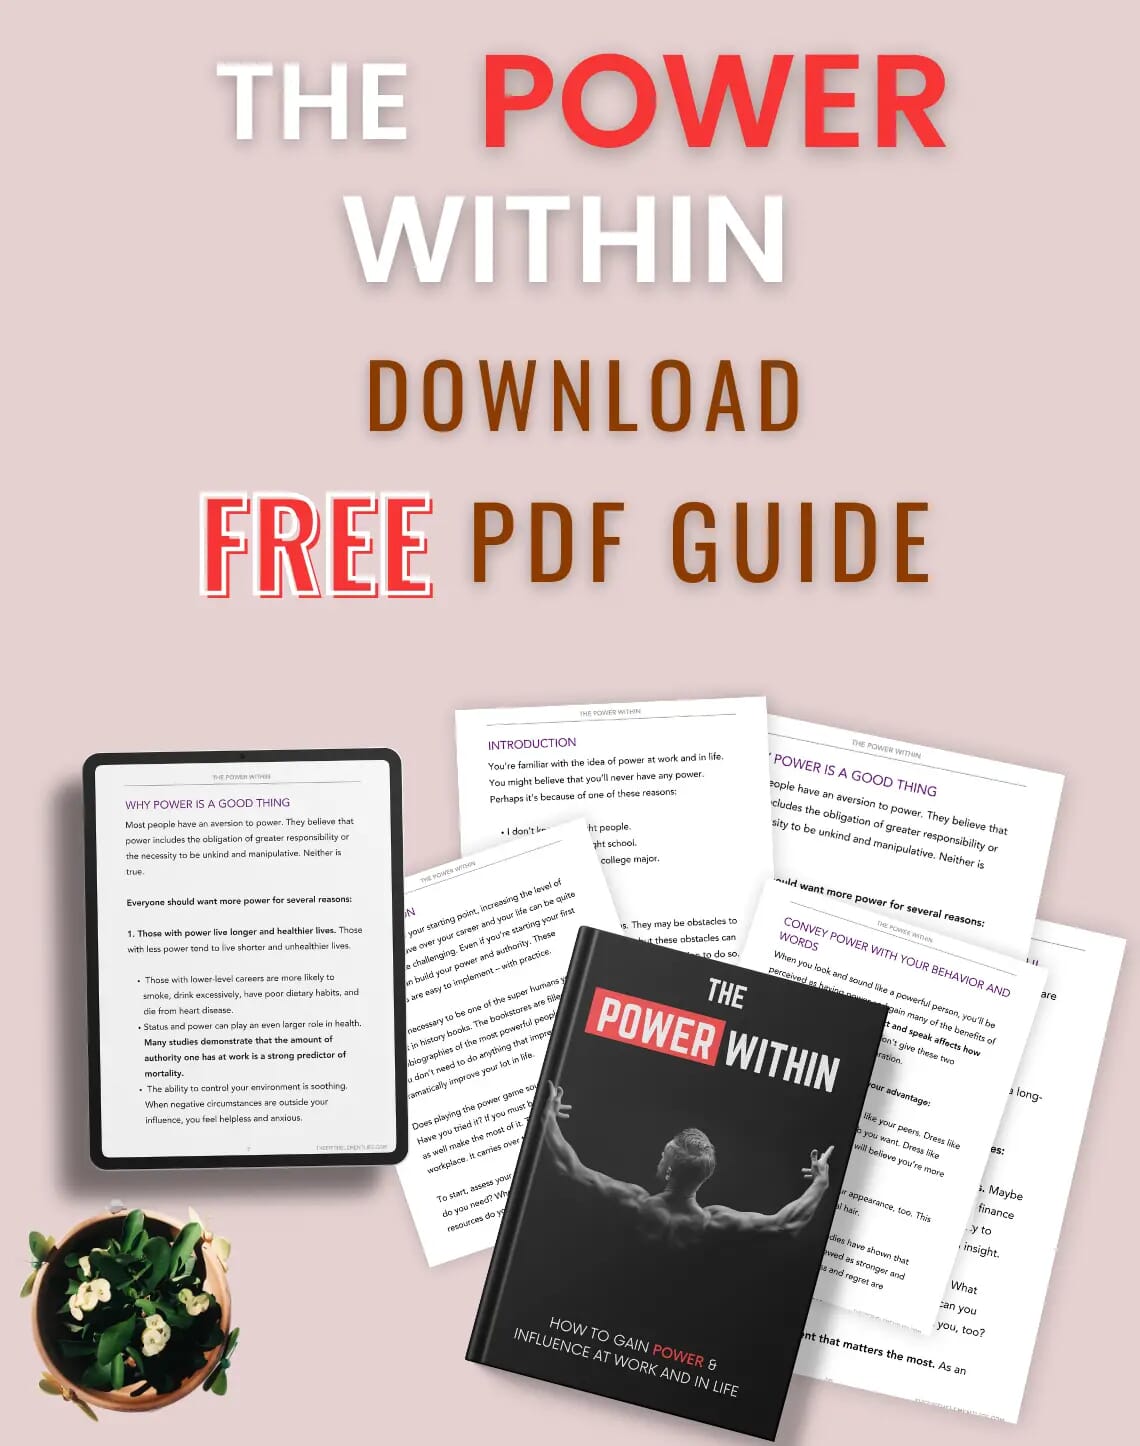 Mastering The Art Of Influence And Impact With "The Power Within" Online Journal FREE DOWNLOAD